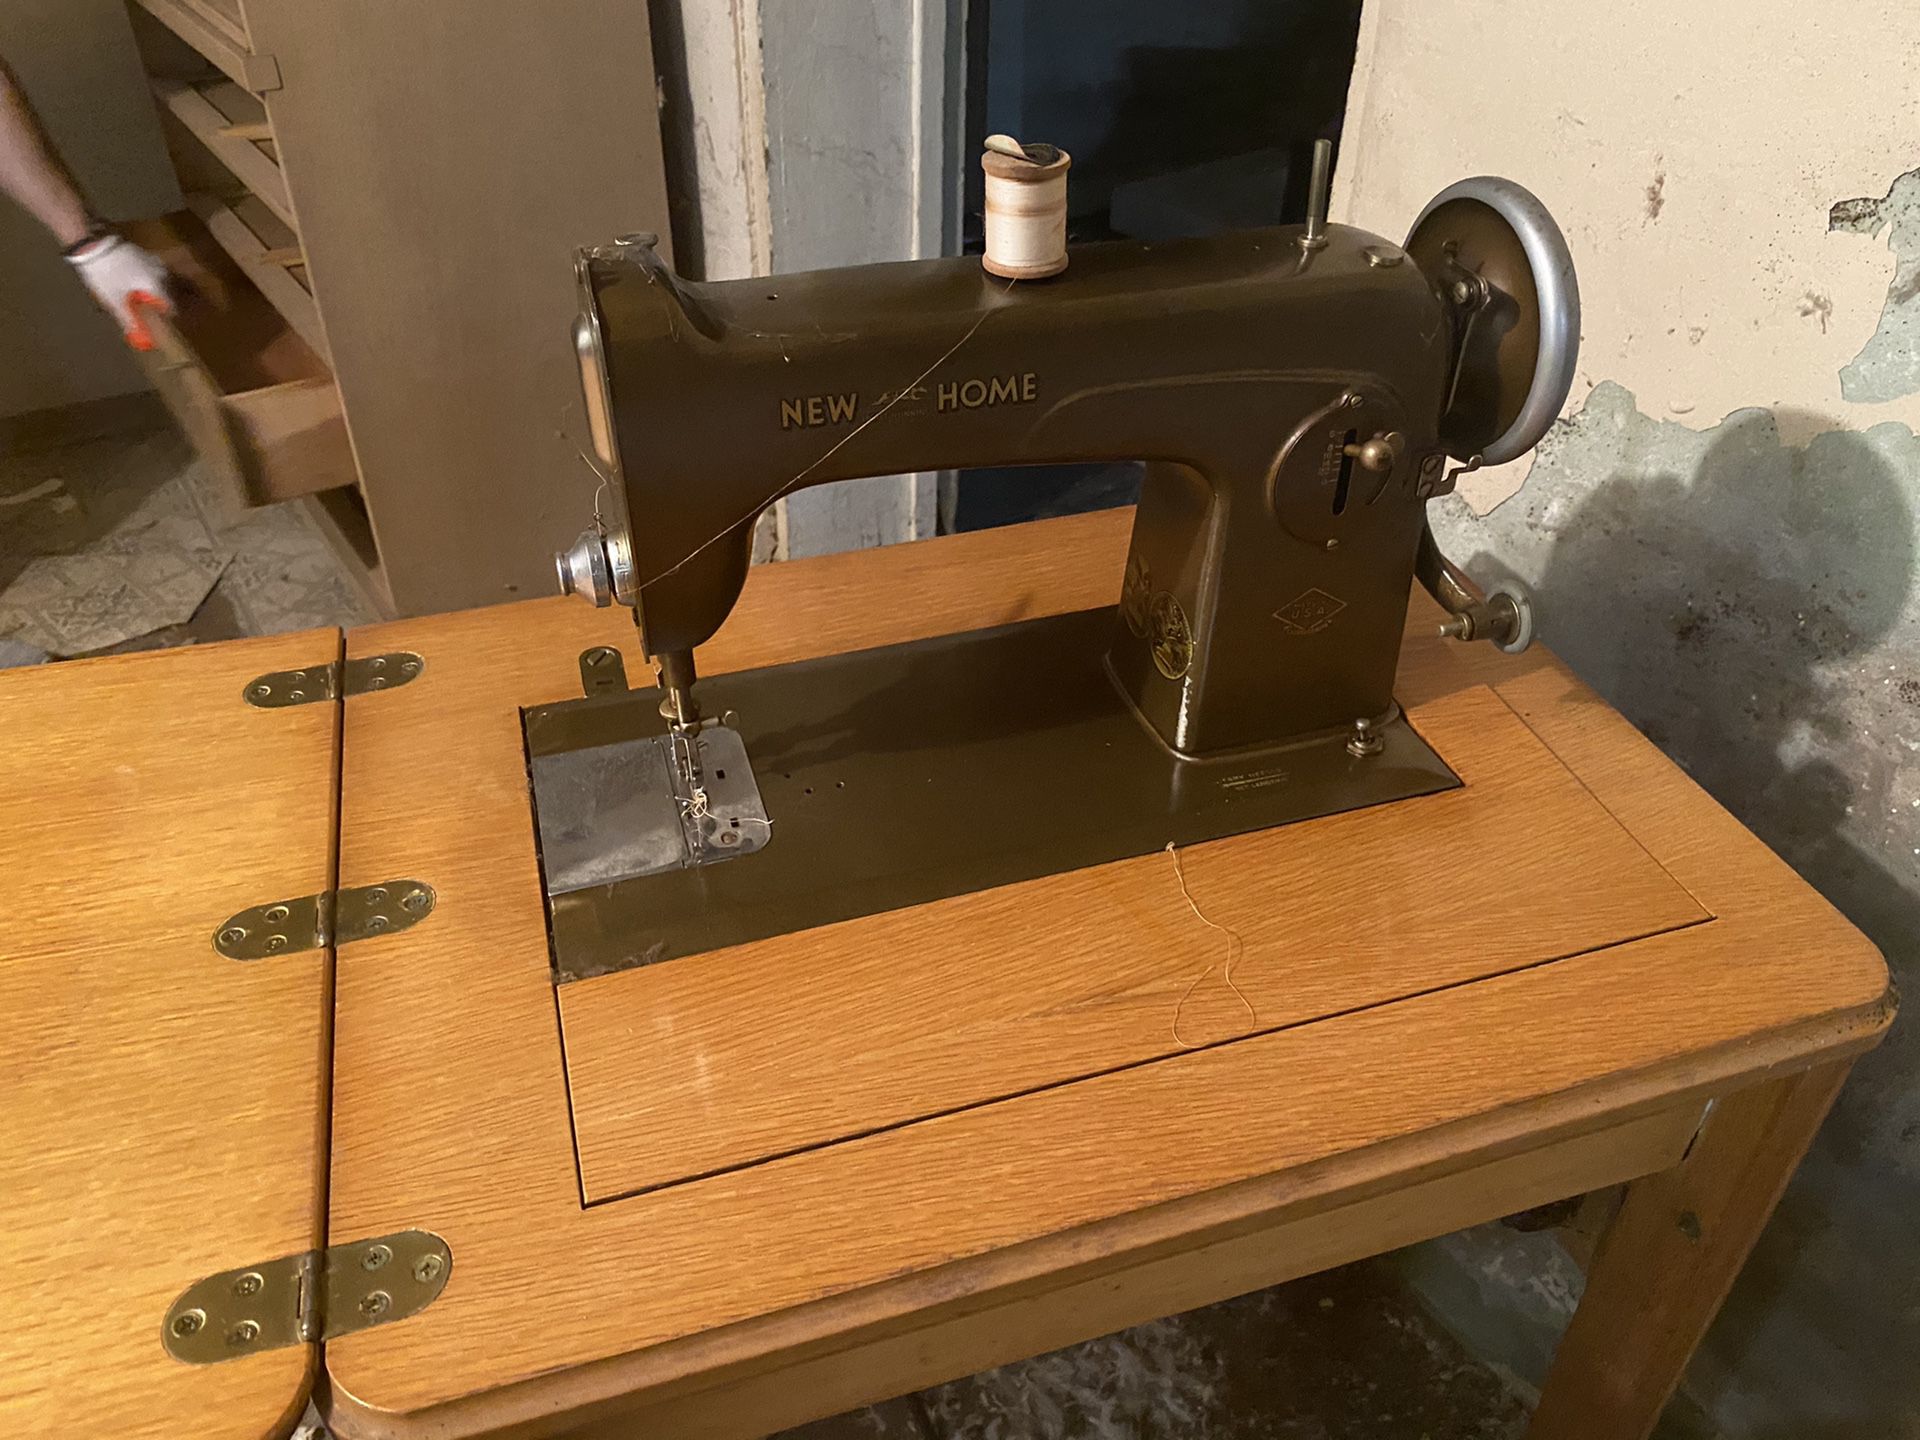 New home sewing machine / table vintage antique mint